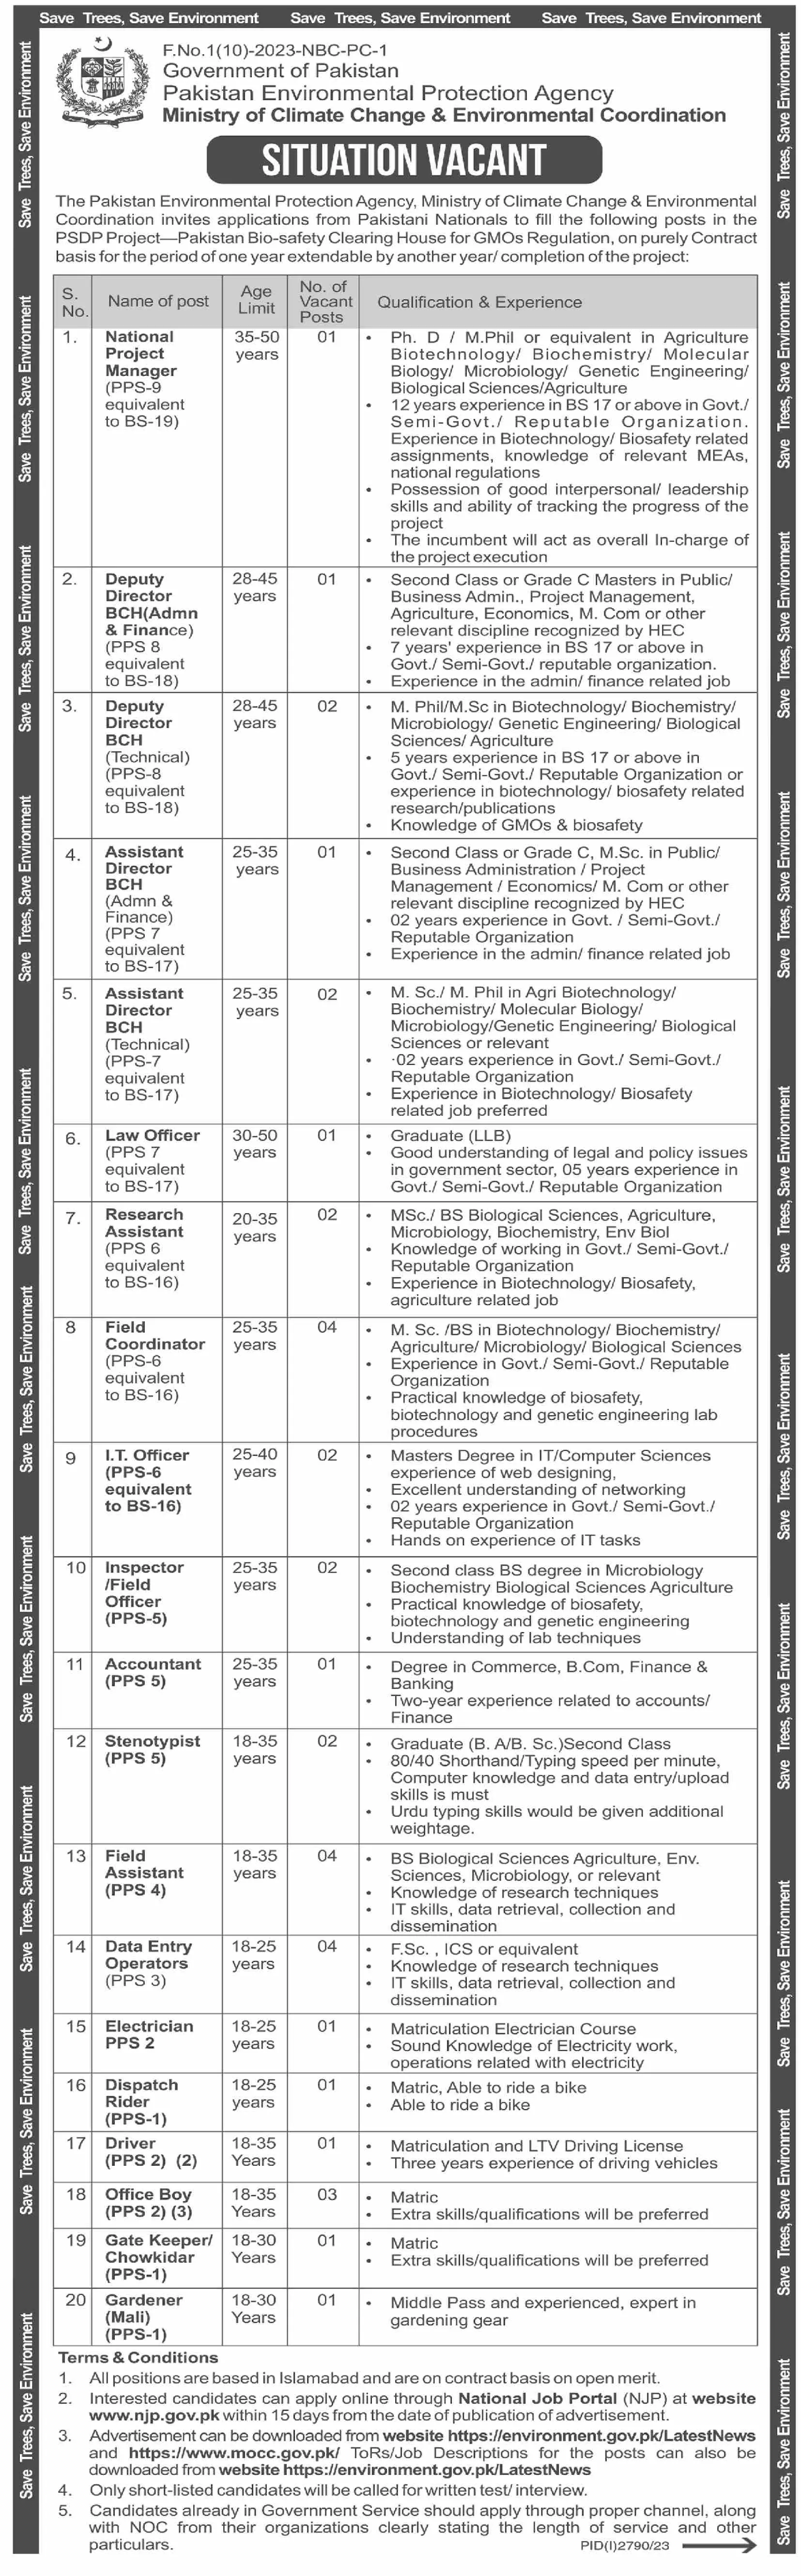 Ministry of Climate Change & Enviromental Coordination Jobs